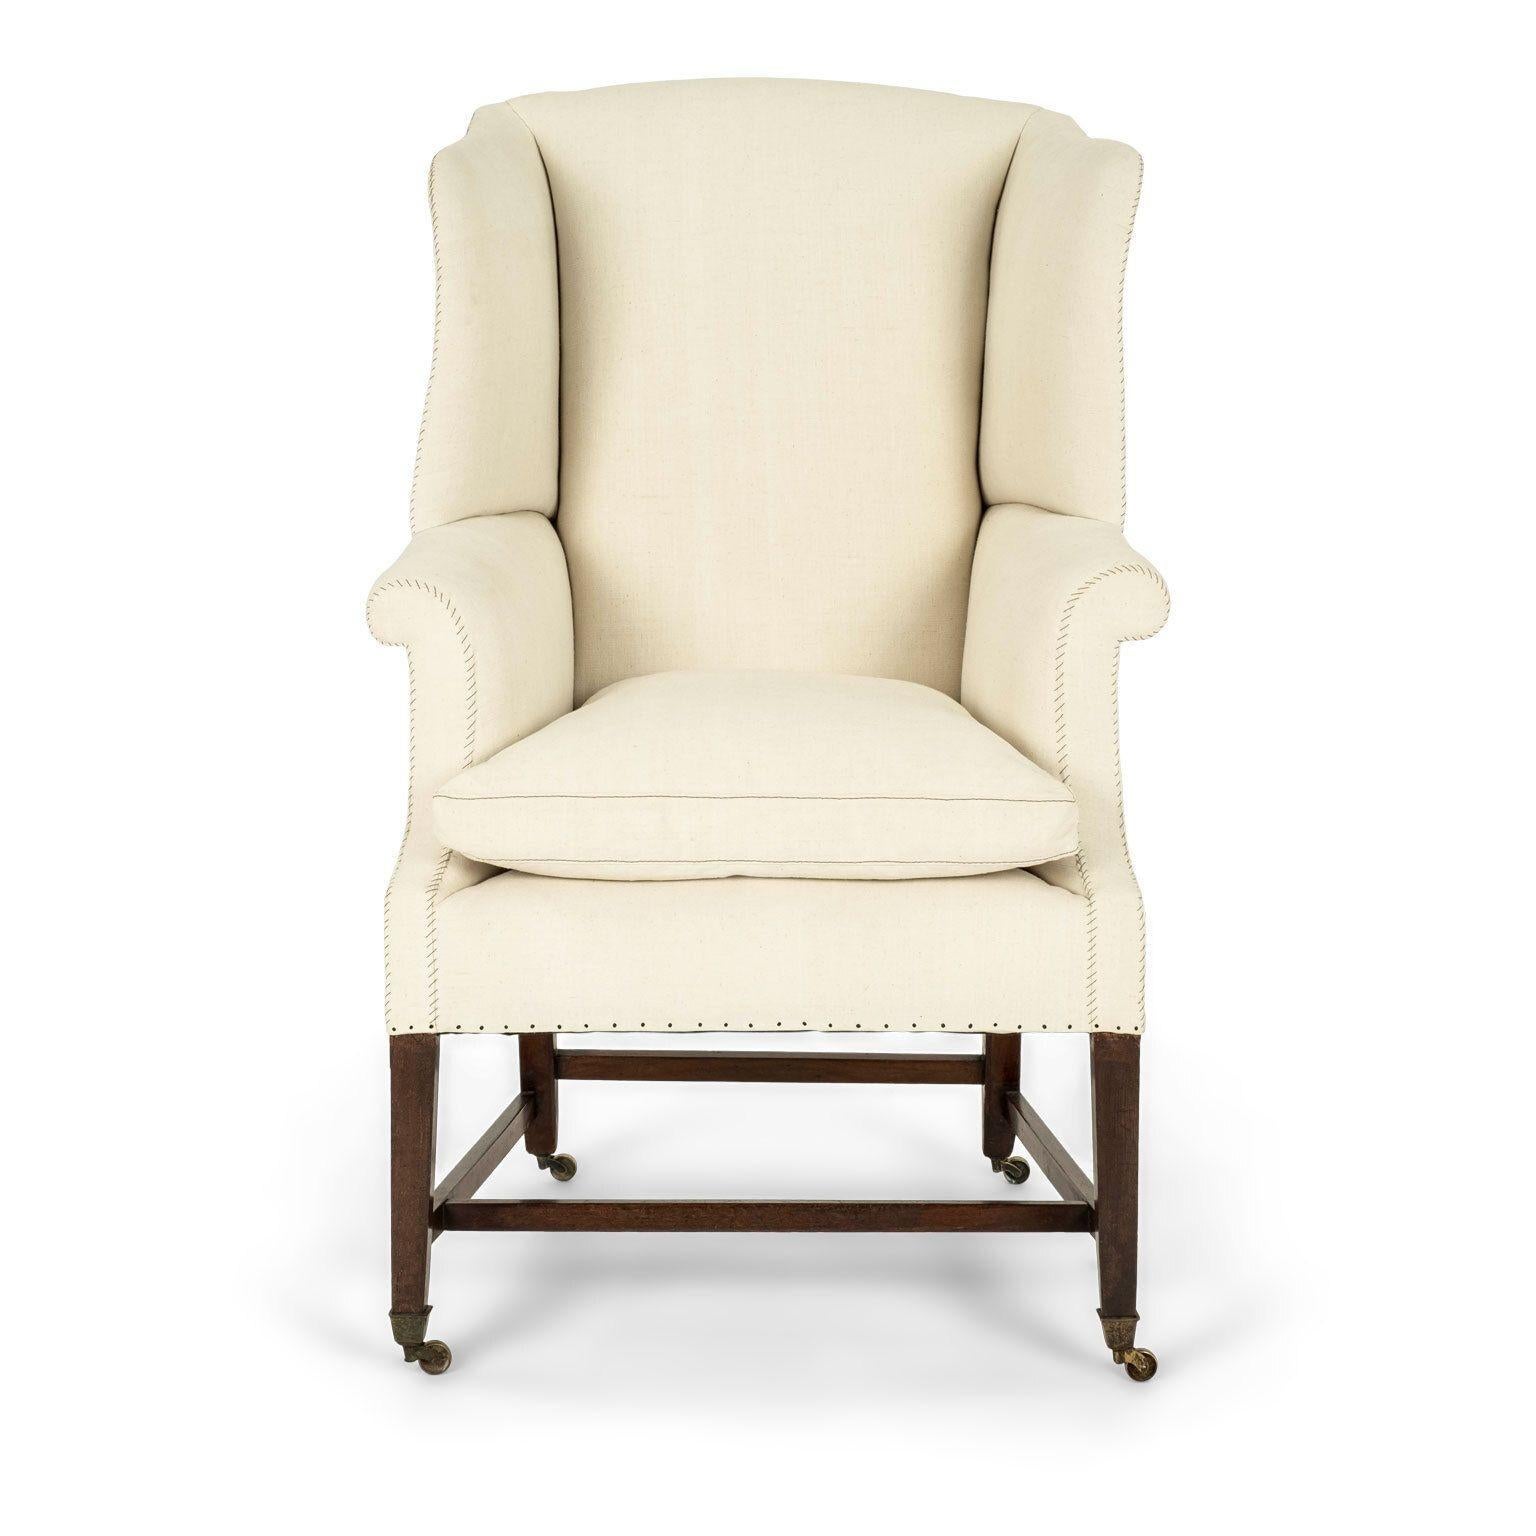 George III style wingback upholstered in antique off-white linen. English porter style Georgian wingback dating to the mid-to-early 19th century. Generously proportioned scale. Rests upon squared mahogany stretchers and legs, tapered at foot in